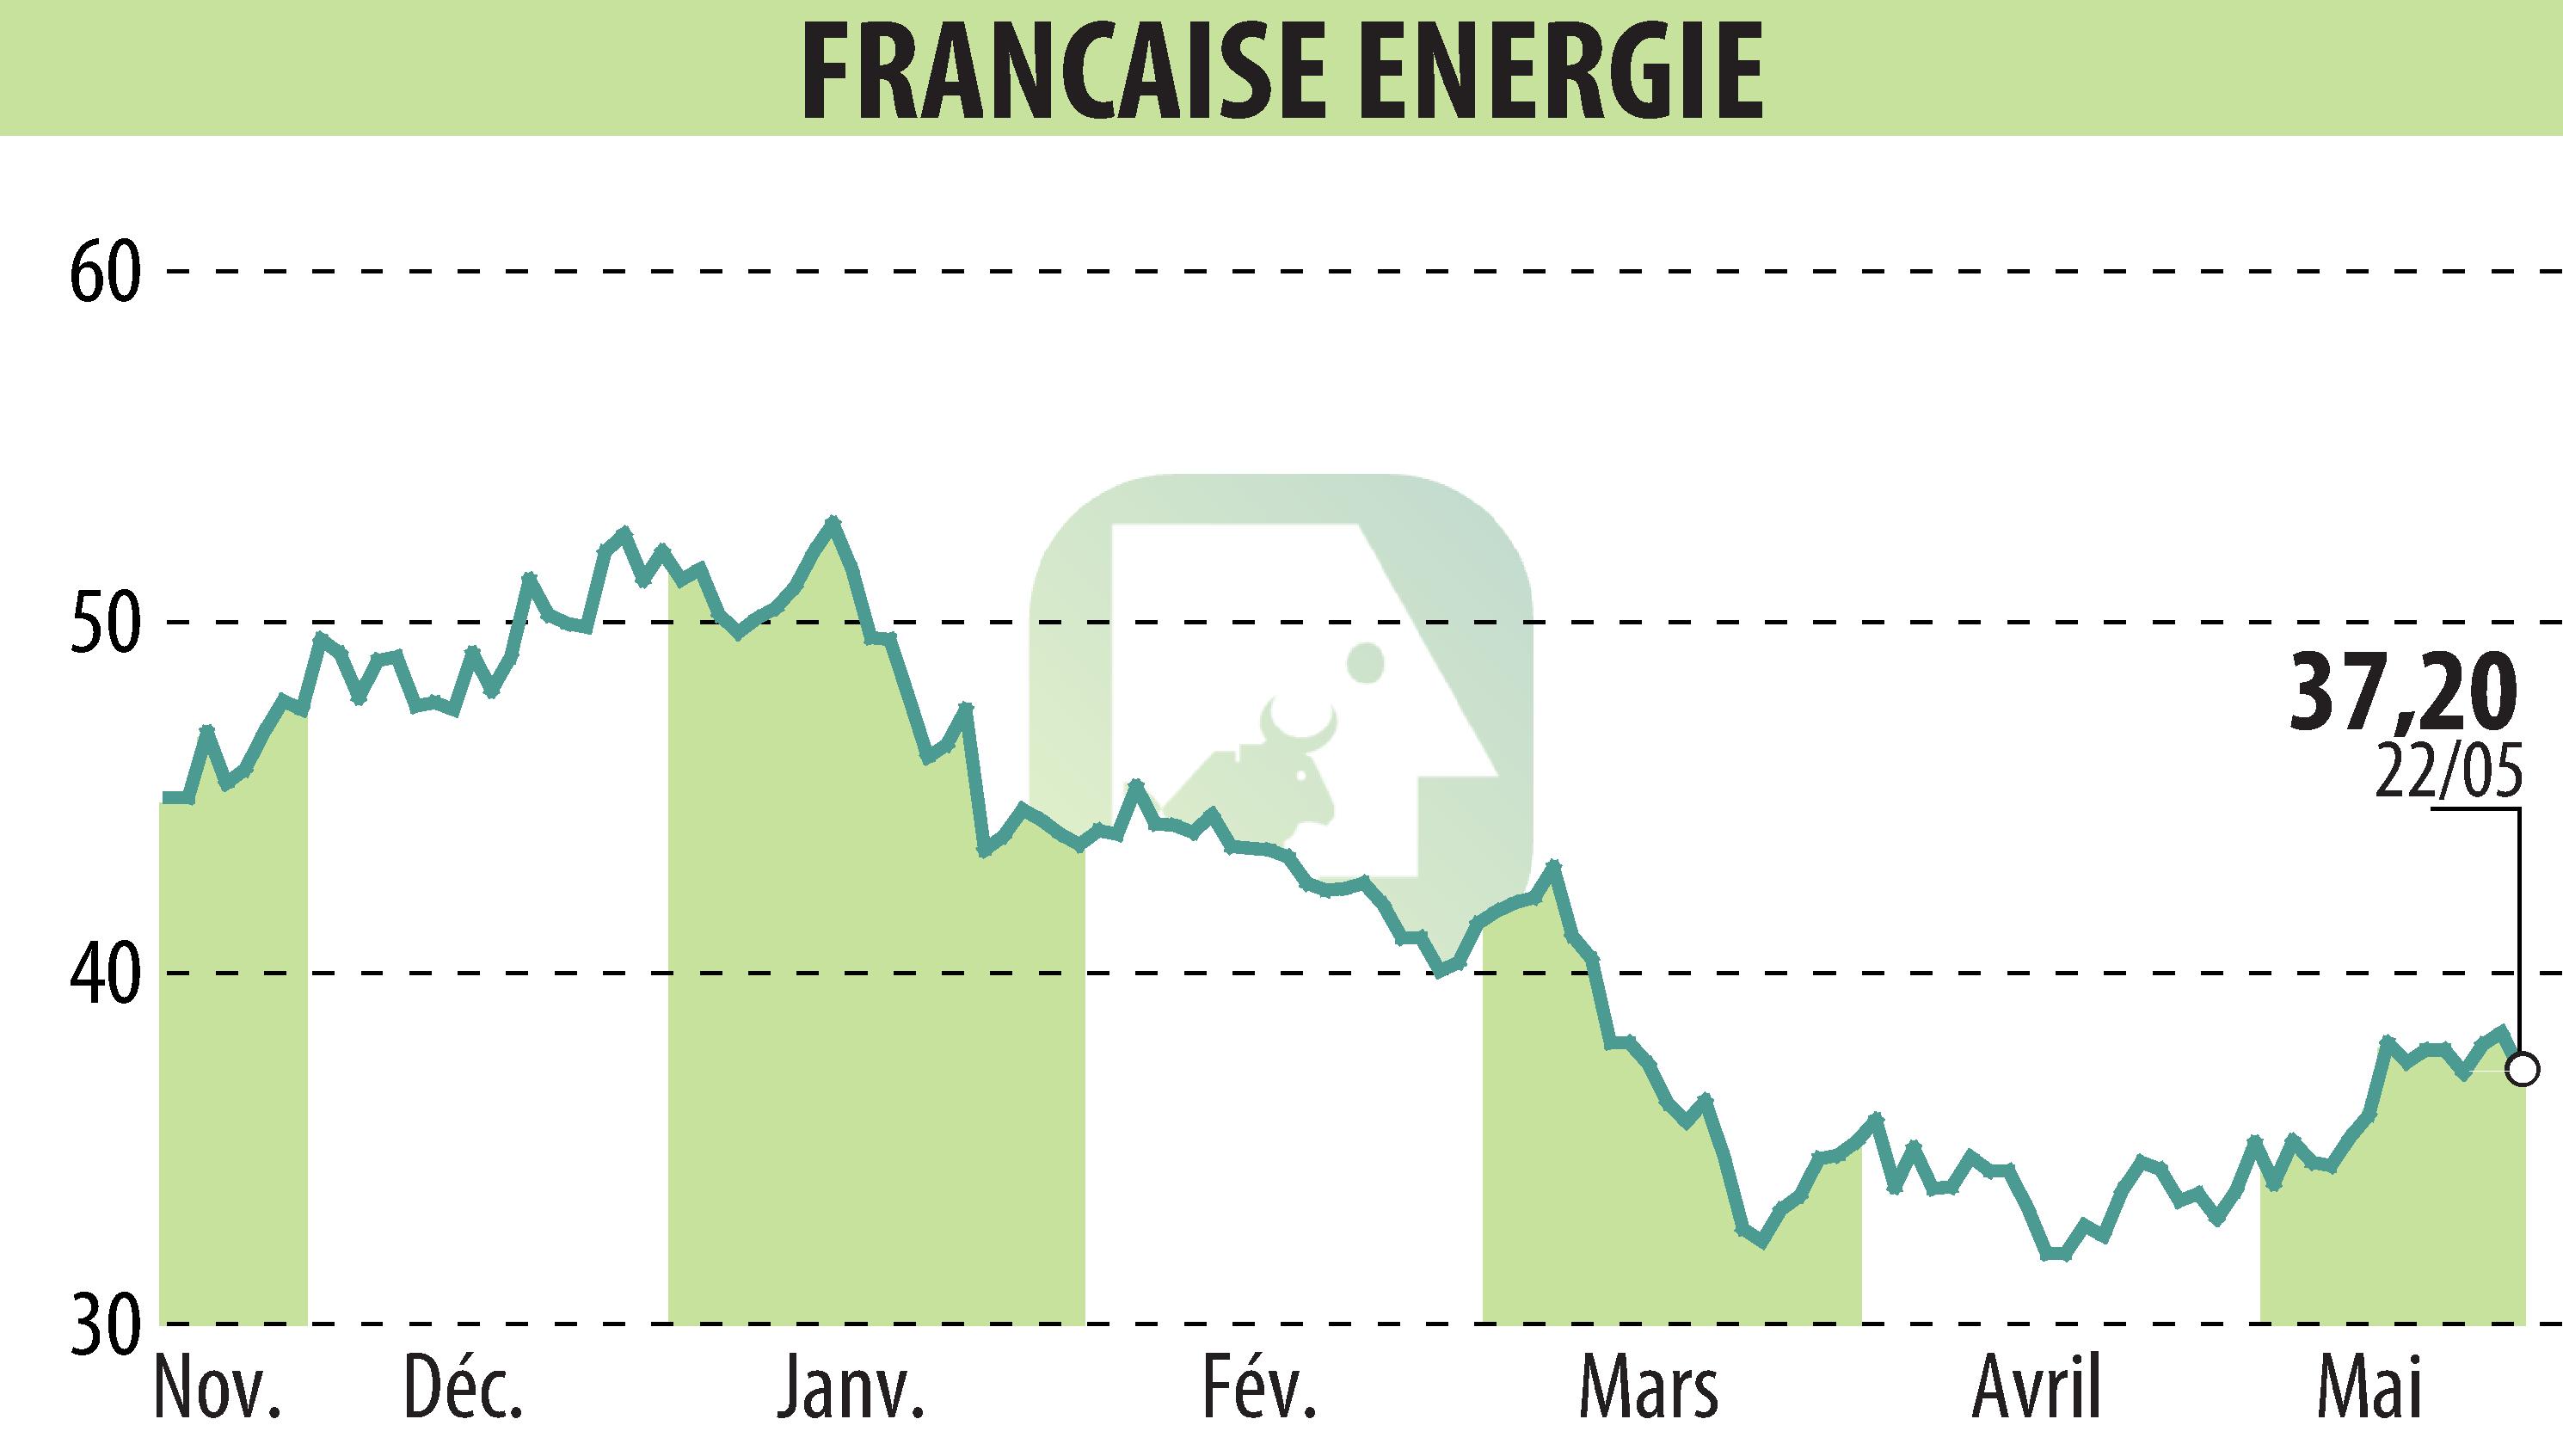 Stock price chart of FRANCAISE ENERGIE (EPA:FDE) showing fluctuations.